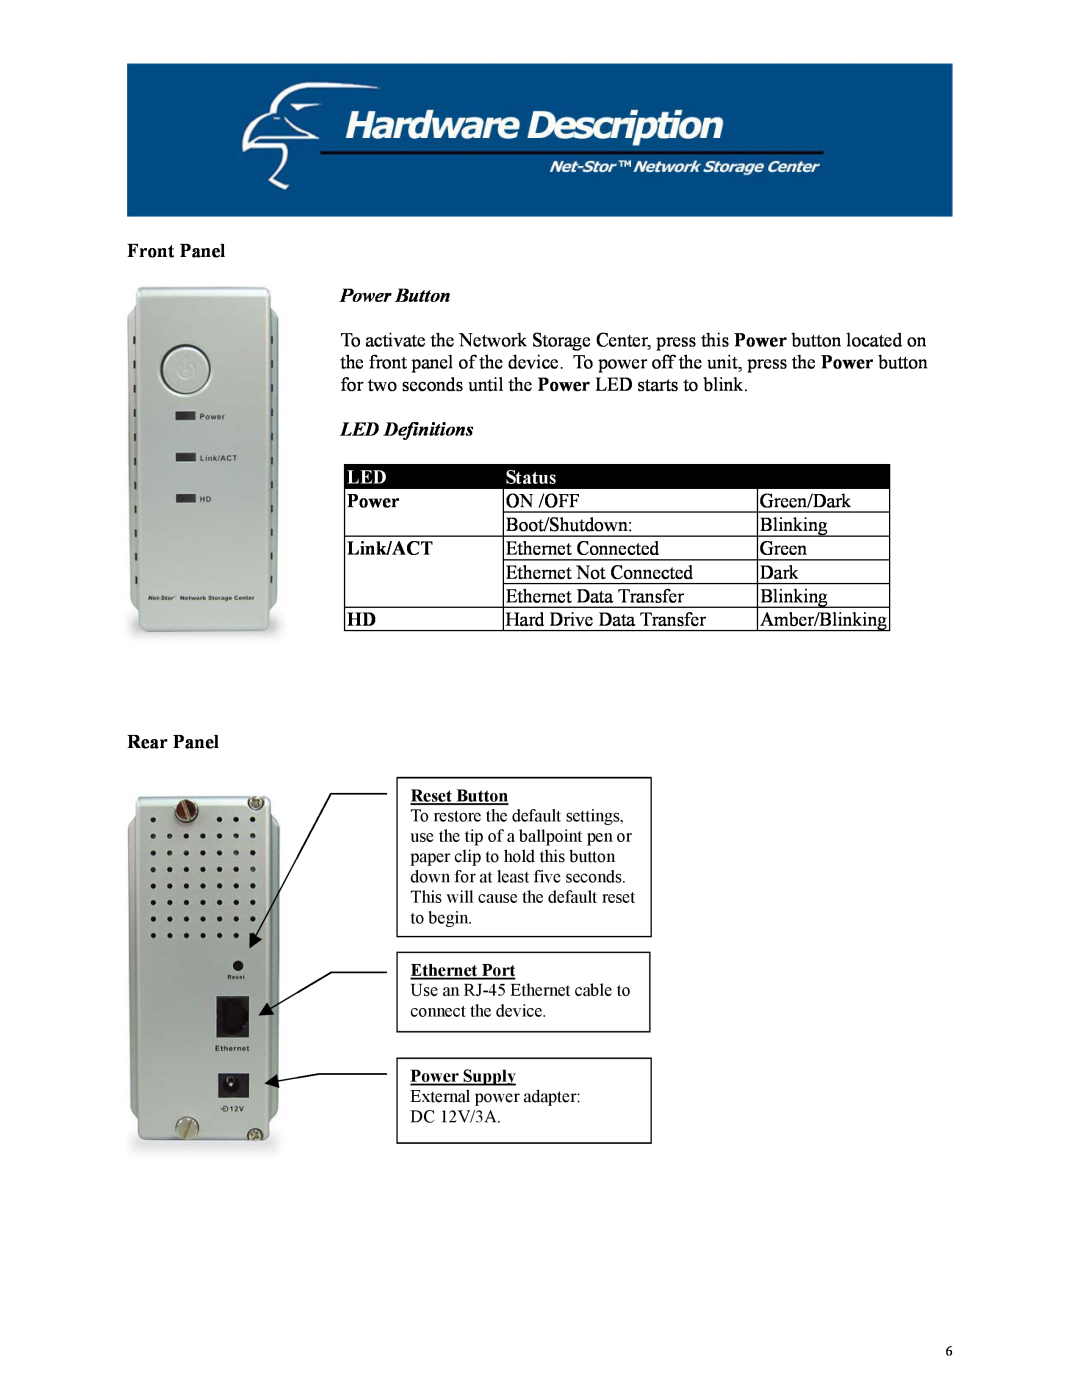 Hawking Technology HNAS1 manual Front Panel, Power Button, LED Definitions, Status, Link/ACT, Rear Panel 